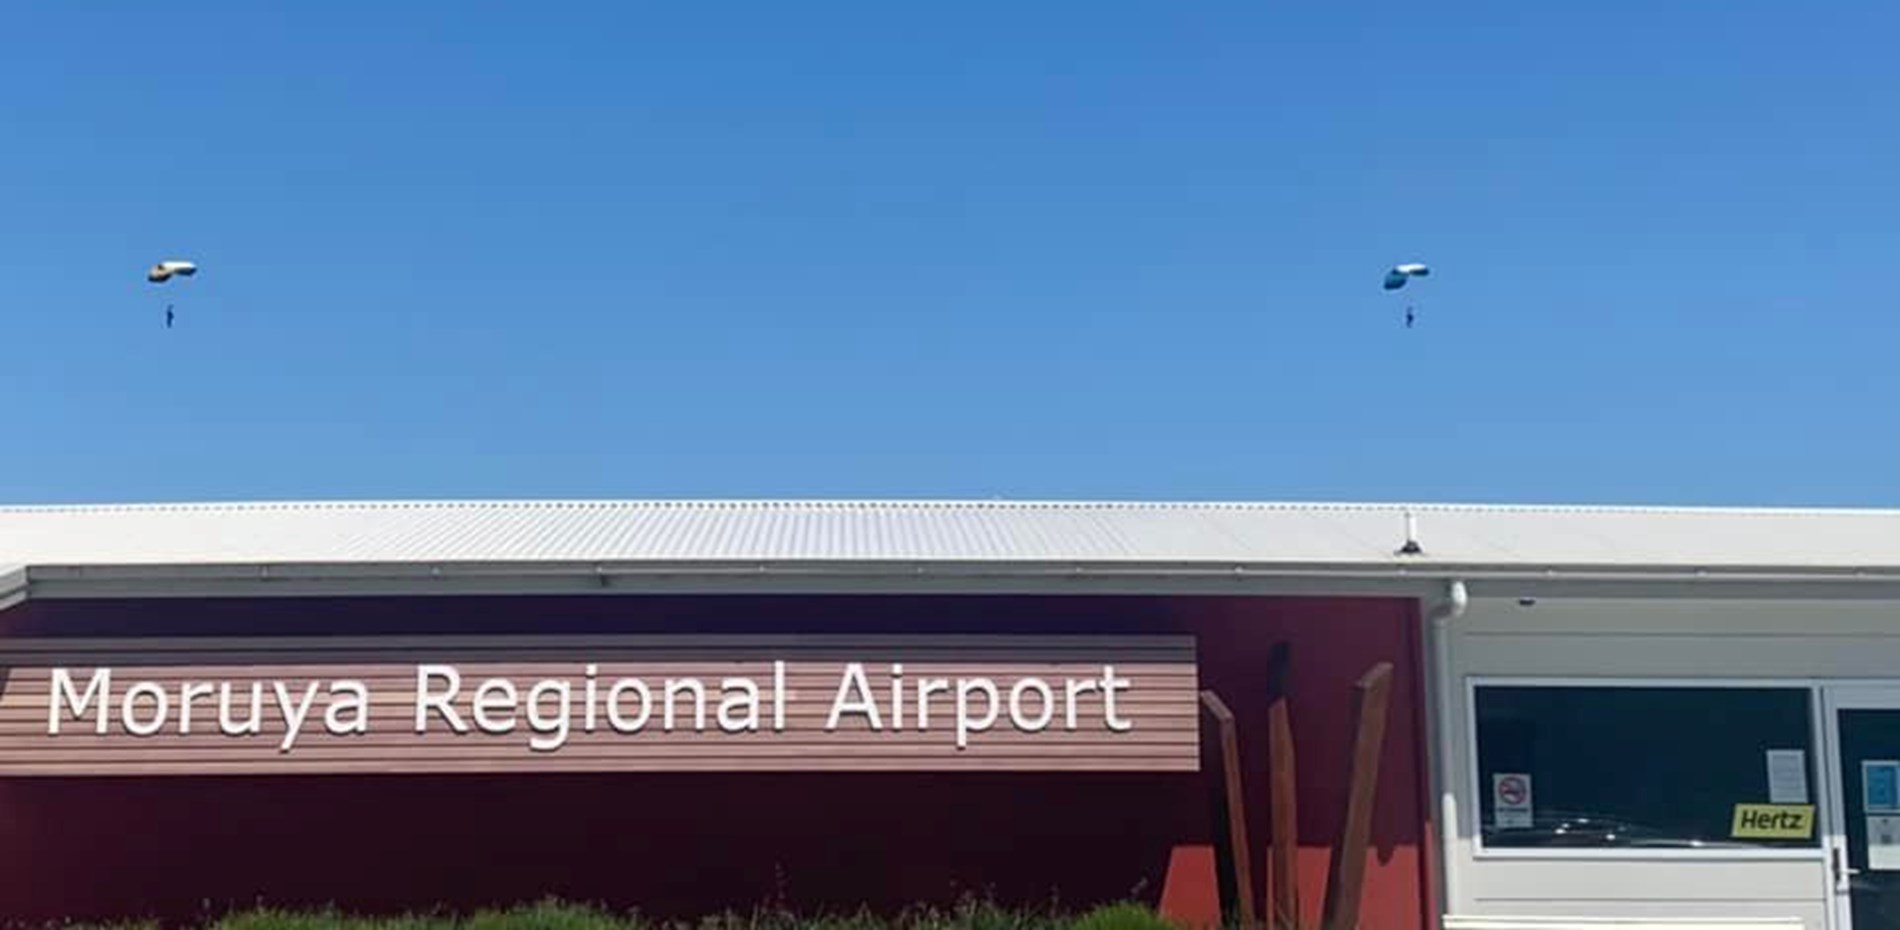 Media release: Moruya Airport to soar thanks to new funding Main Image